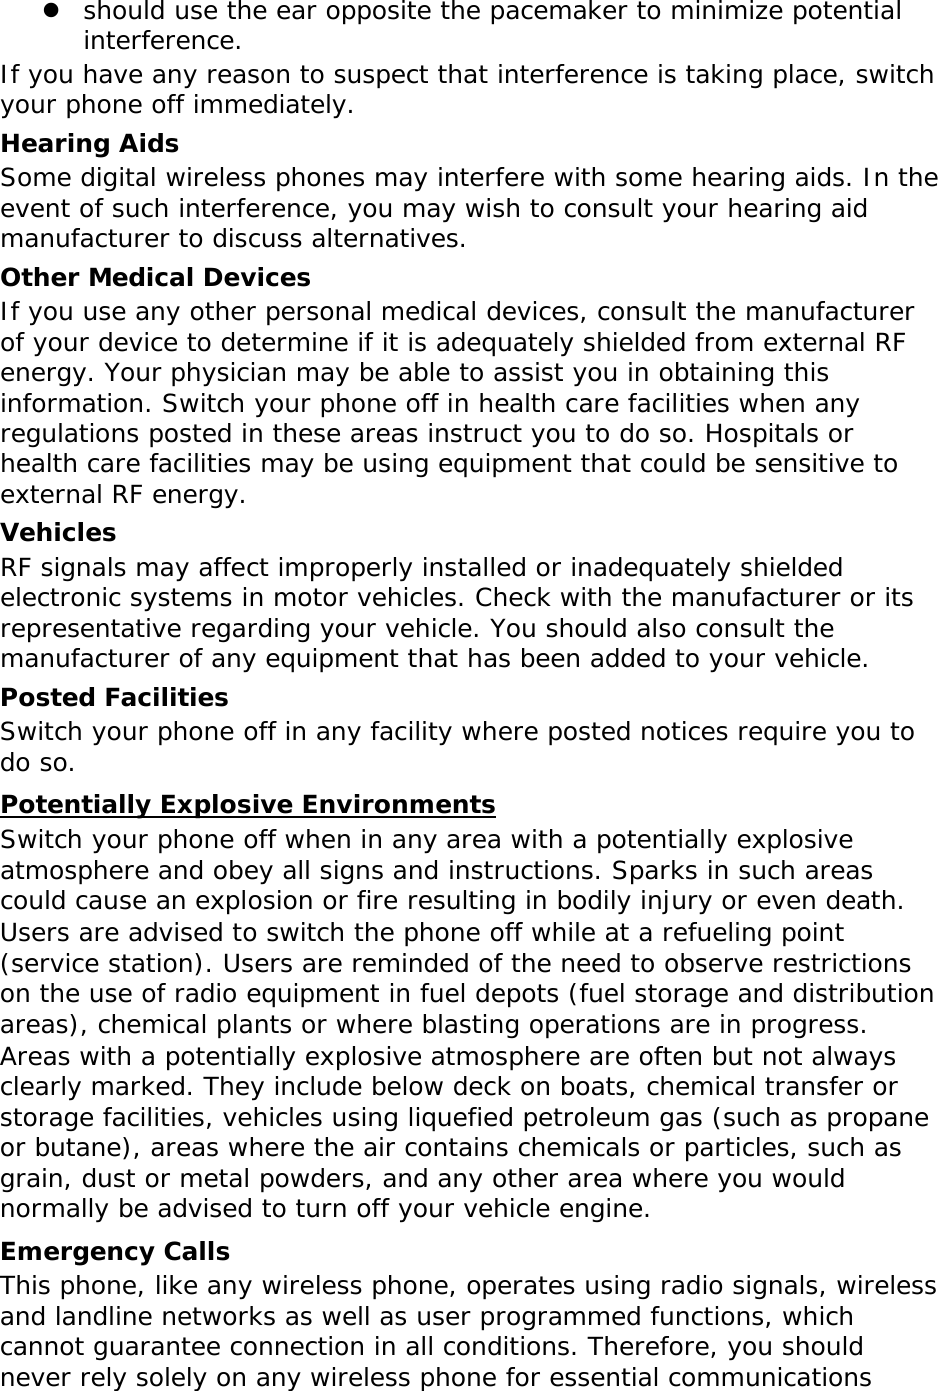  should use the ear opposite the pacemaker to minimize potential interference. If you have any reason to suspect that interference is taking place, switch your phone off immediately. Hearing Aids Some digital wireless phones may interfere with some hearing aids. In the event of such interference, you may wish to consult your hearing aid manufacturer to discuss alternatives. Other Medical Devices If you use any other personal medical devices, consult the manufacturer of your device to determine if it is adequately shielded from external RF energy. Your physician may be able to assist you in obtaining this information. Switch your phone off in health care facilities when any regulations posted in these areas instruct you to do so. Hospitals or health care facilities may be using equipment that could be sensitive to external RF energy. Vehicles RF signals may affect improperly installed or inadequately shielded electronic systems in motor vehicles. Check with the manufacturer or its representative regarding your vehicle. You should also consult the manufacturer of any equipment that has been added to your vehicle. Posted Facilities Switch your phone off in any facility where posted notices require you to do so. Potentially Explosive Environments Switch your phone off when in any area with a potentially explosive atmosphere and obey all signs and instructions. Sparks in such areas could cause an explosion or fire resulting in bodily injury or even death. Users are advised to switch the phone off while at a refueling point (service station). Users are reminded of the need to observe restrictions on the use of radio equipment in fuel depots (fuel storage and distribution areas), chemical plants or where blasting operations are in progress. Areas with a potentially explosive atmosphere are often but not always clearly marked. They include below deck on boats, chemical transfer or storage facilities, vehicles using liquefied petroleum gas (such as propane or butane), areas where the air contains chemicals or particles, such as grain, dust or metal powders, and any other area where you would normally be advised to turn off your vehicle engine. Emergency Calls This phone, like any wireless phone, operates using radio signals, wireless and landline networks as well as user programmed functions, which cannot guarantee connection in all conditions. Therefore, you should never rely solely on any wireless phone for essential communications 